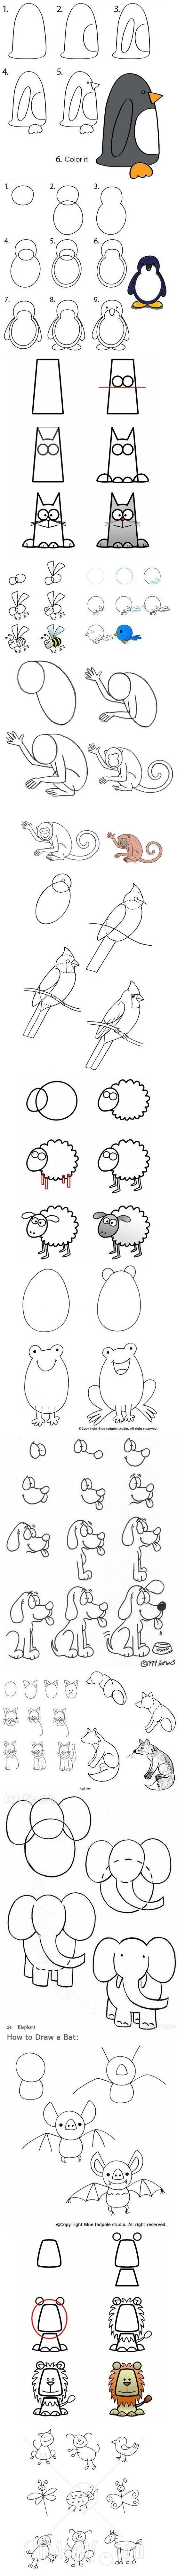 How-To: Draw Cute Animals Fun for kids!!